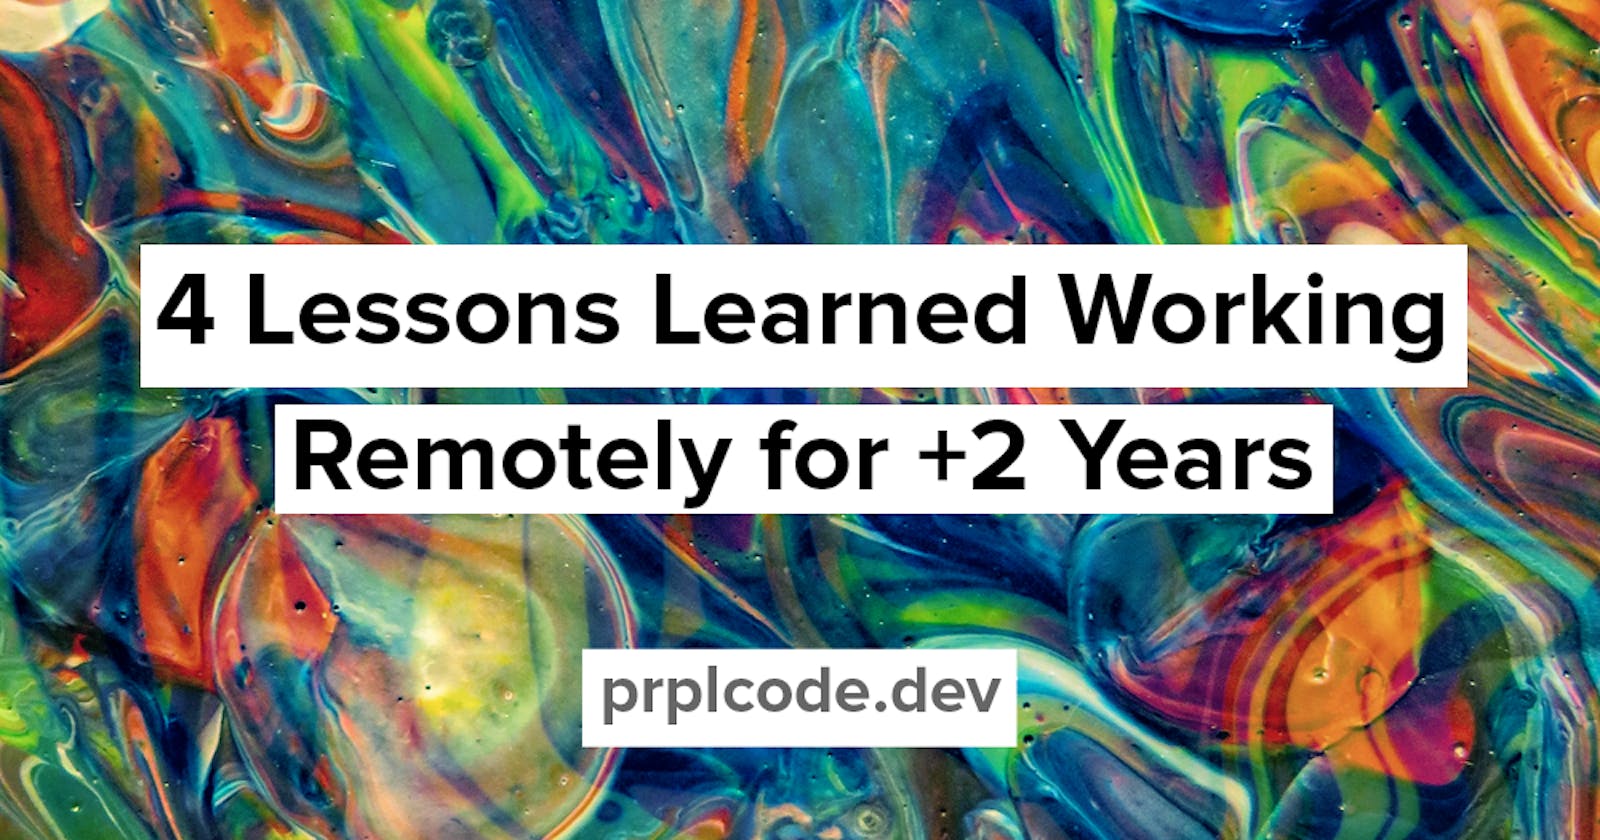 4 Lessons Learned Working Remotely for +2 Years